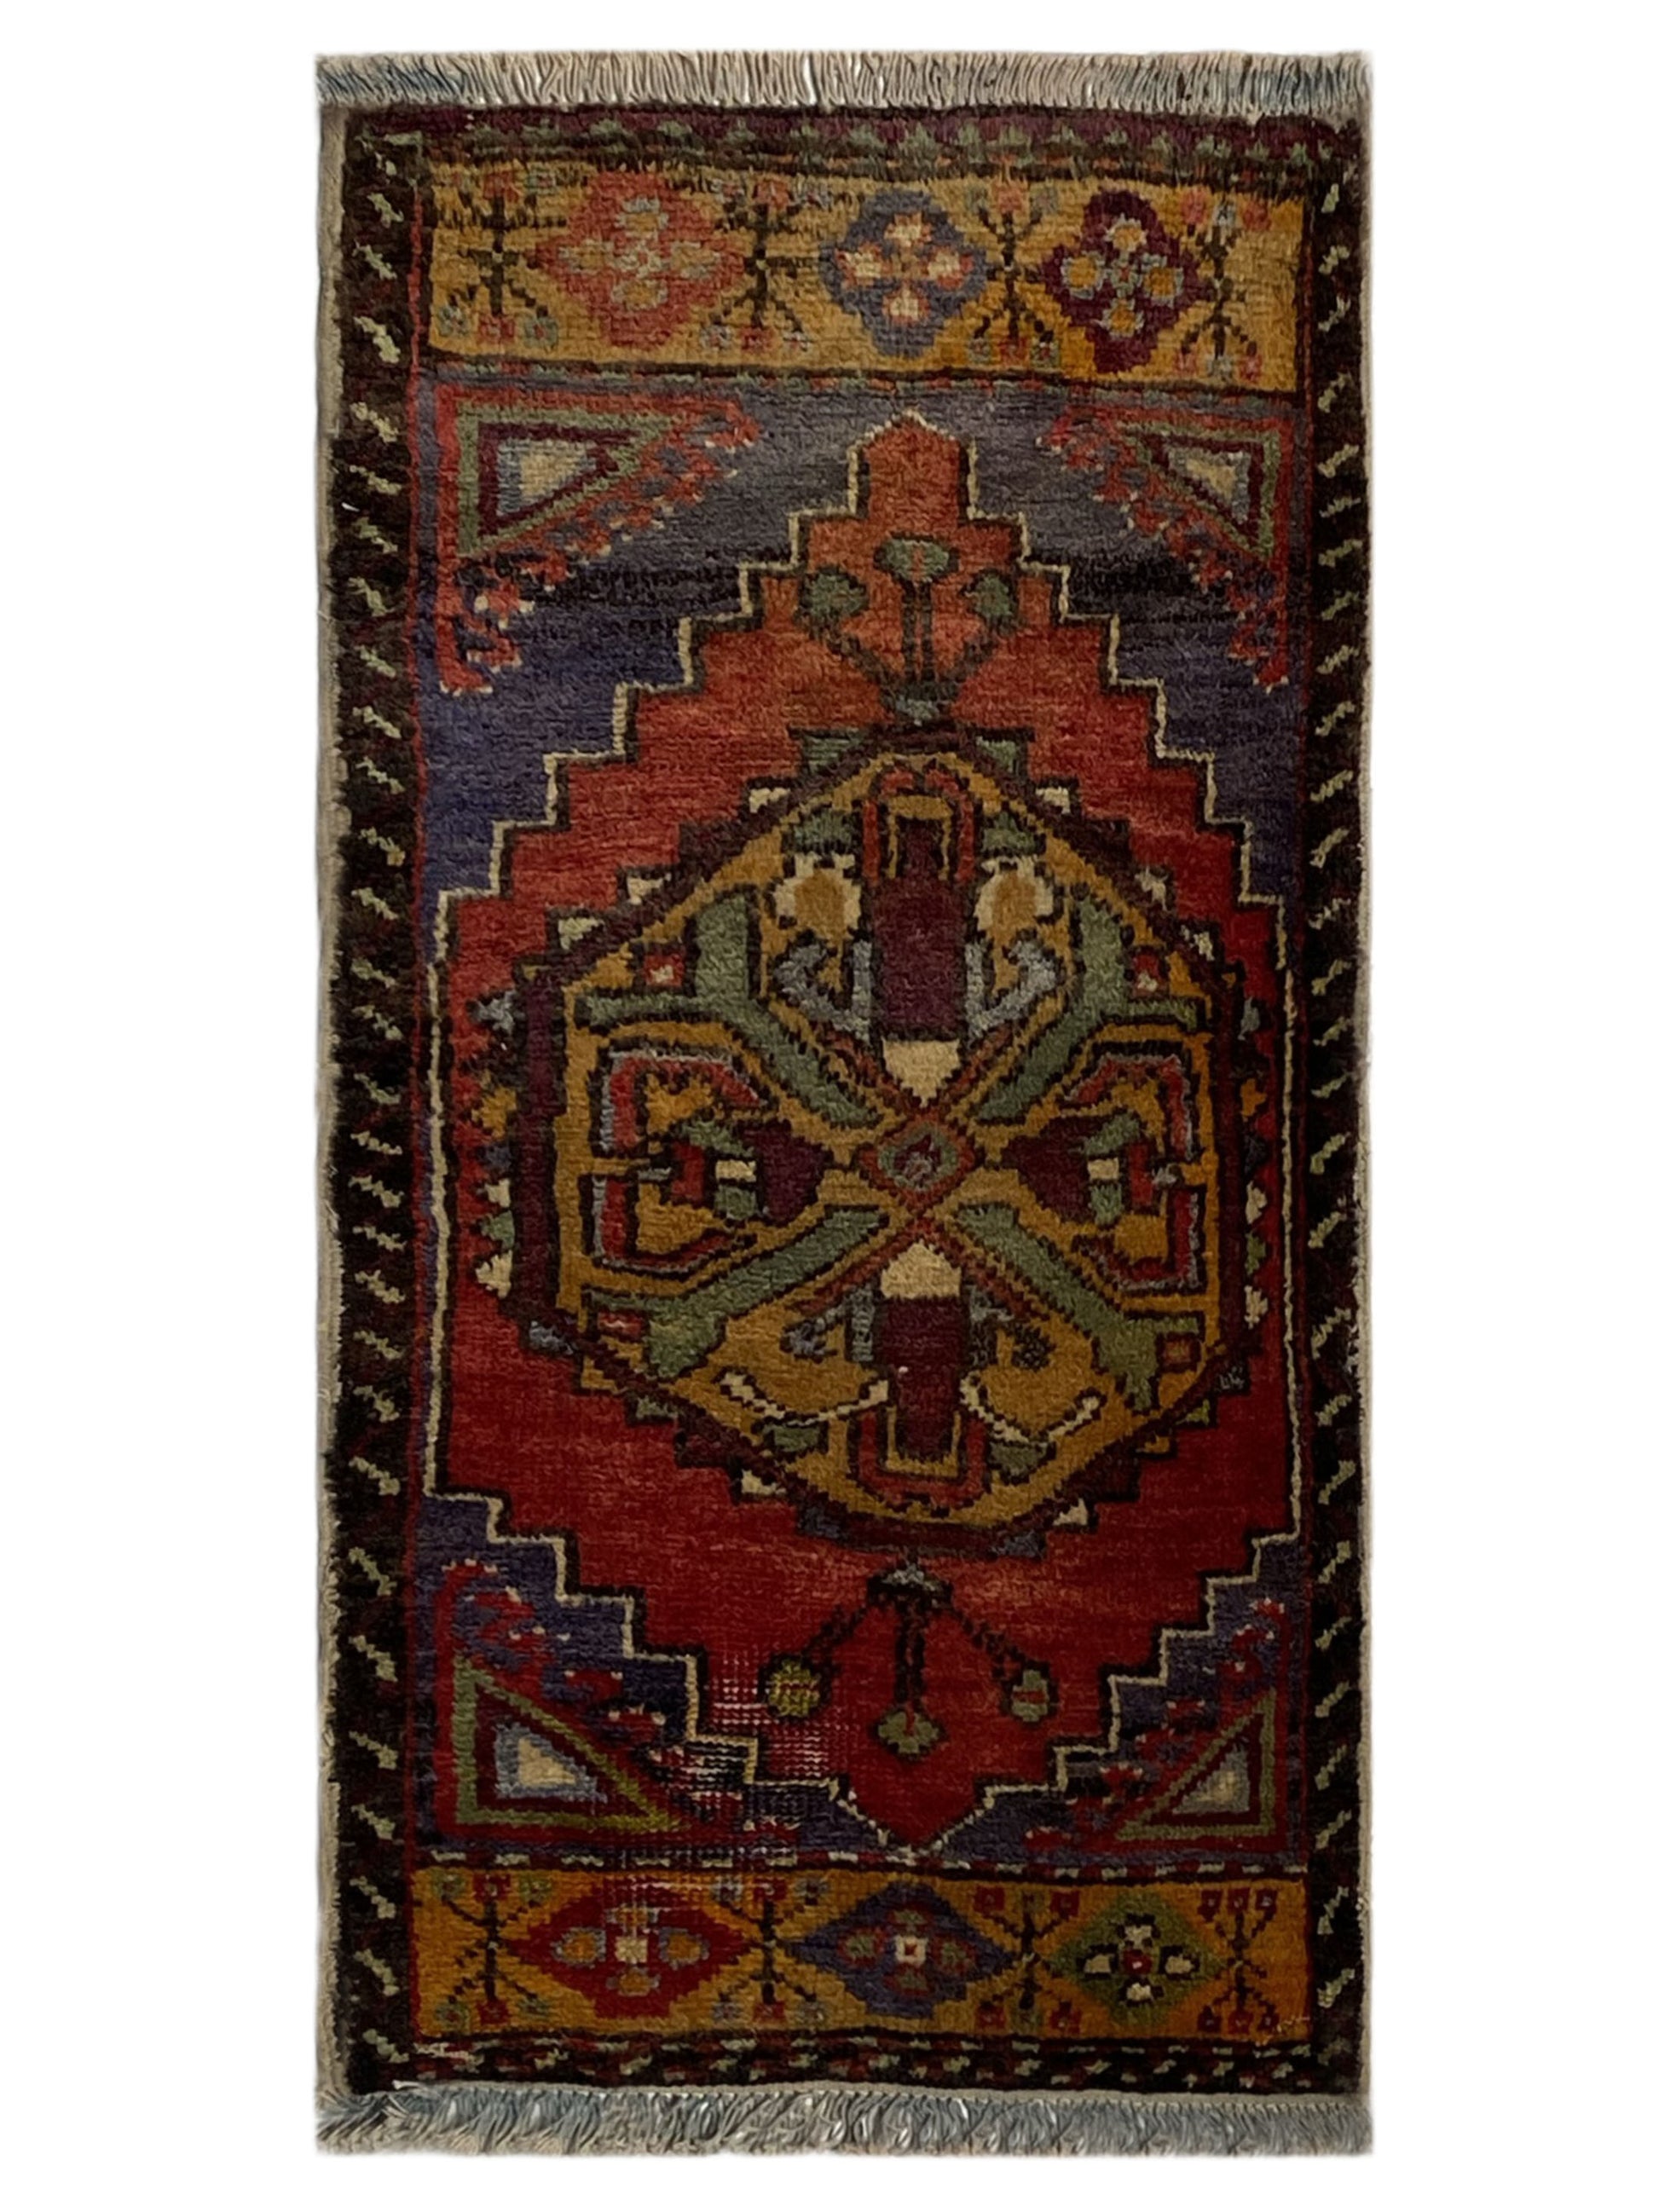 Artisan Angelina 310687 Red Vintage Knotted Rug